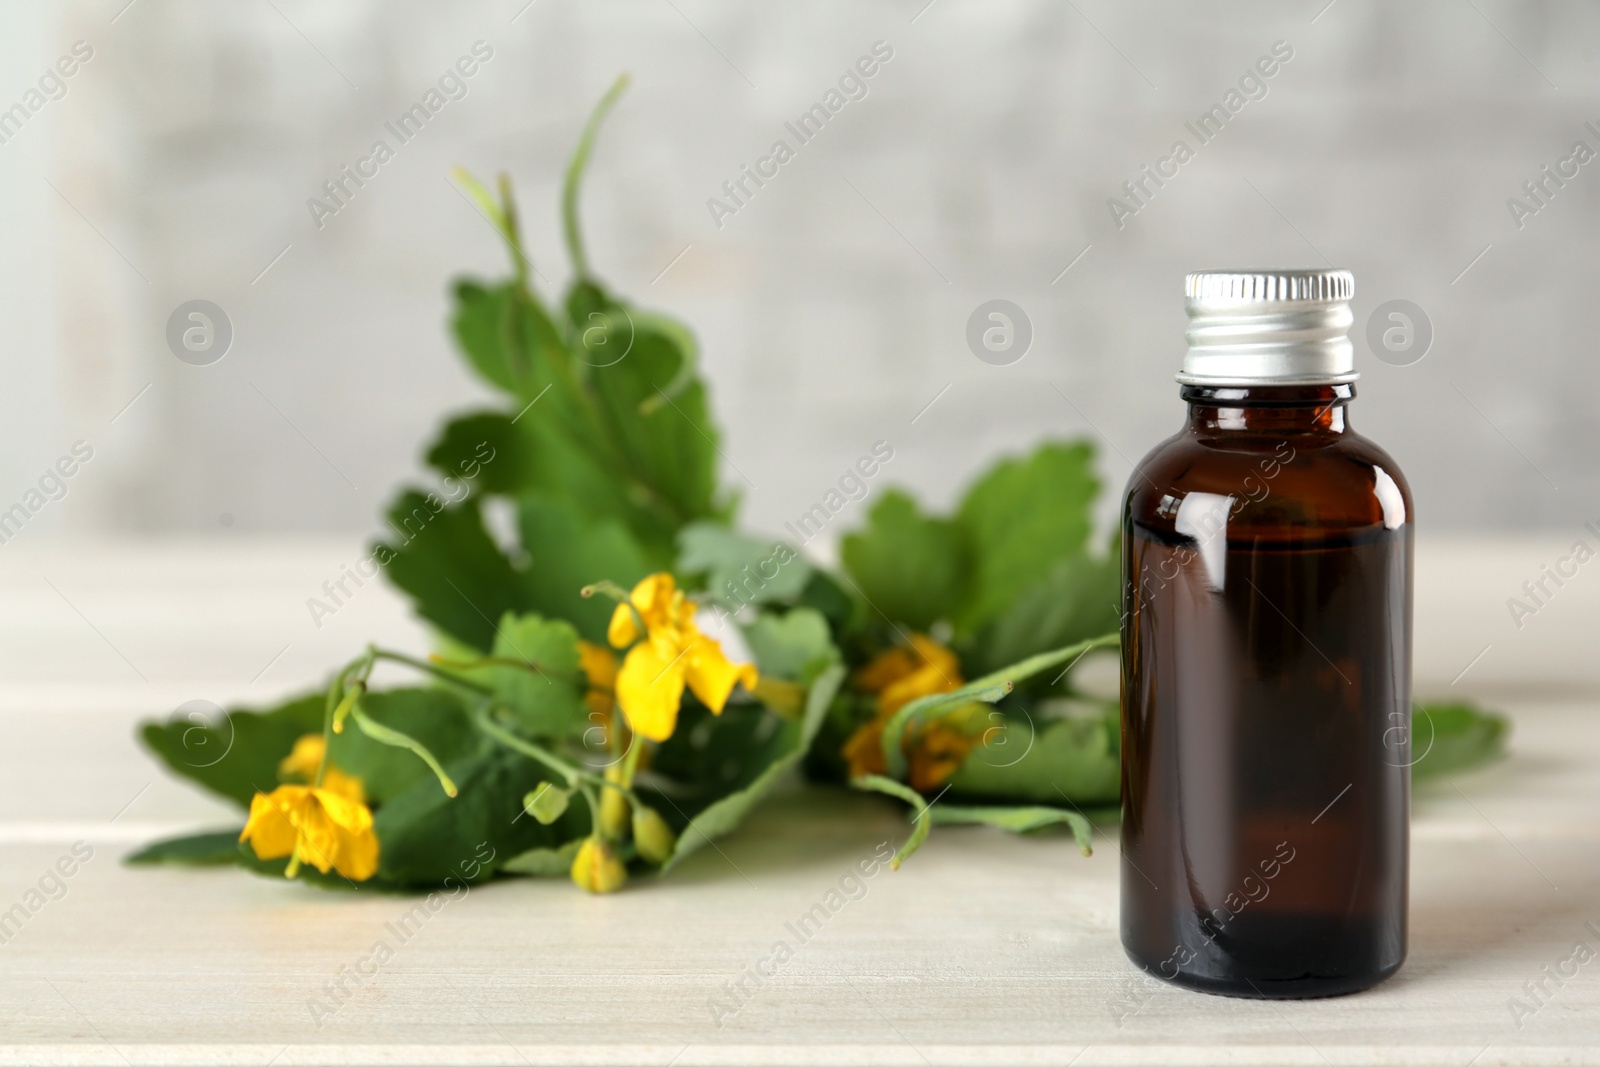 Photo of Bottle of celandine tincture and plant on white wooden table, space for text